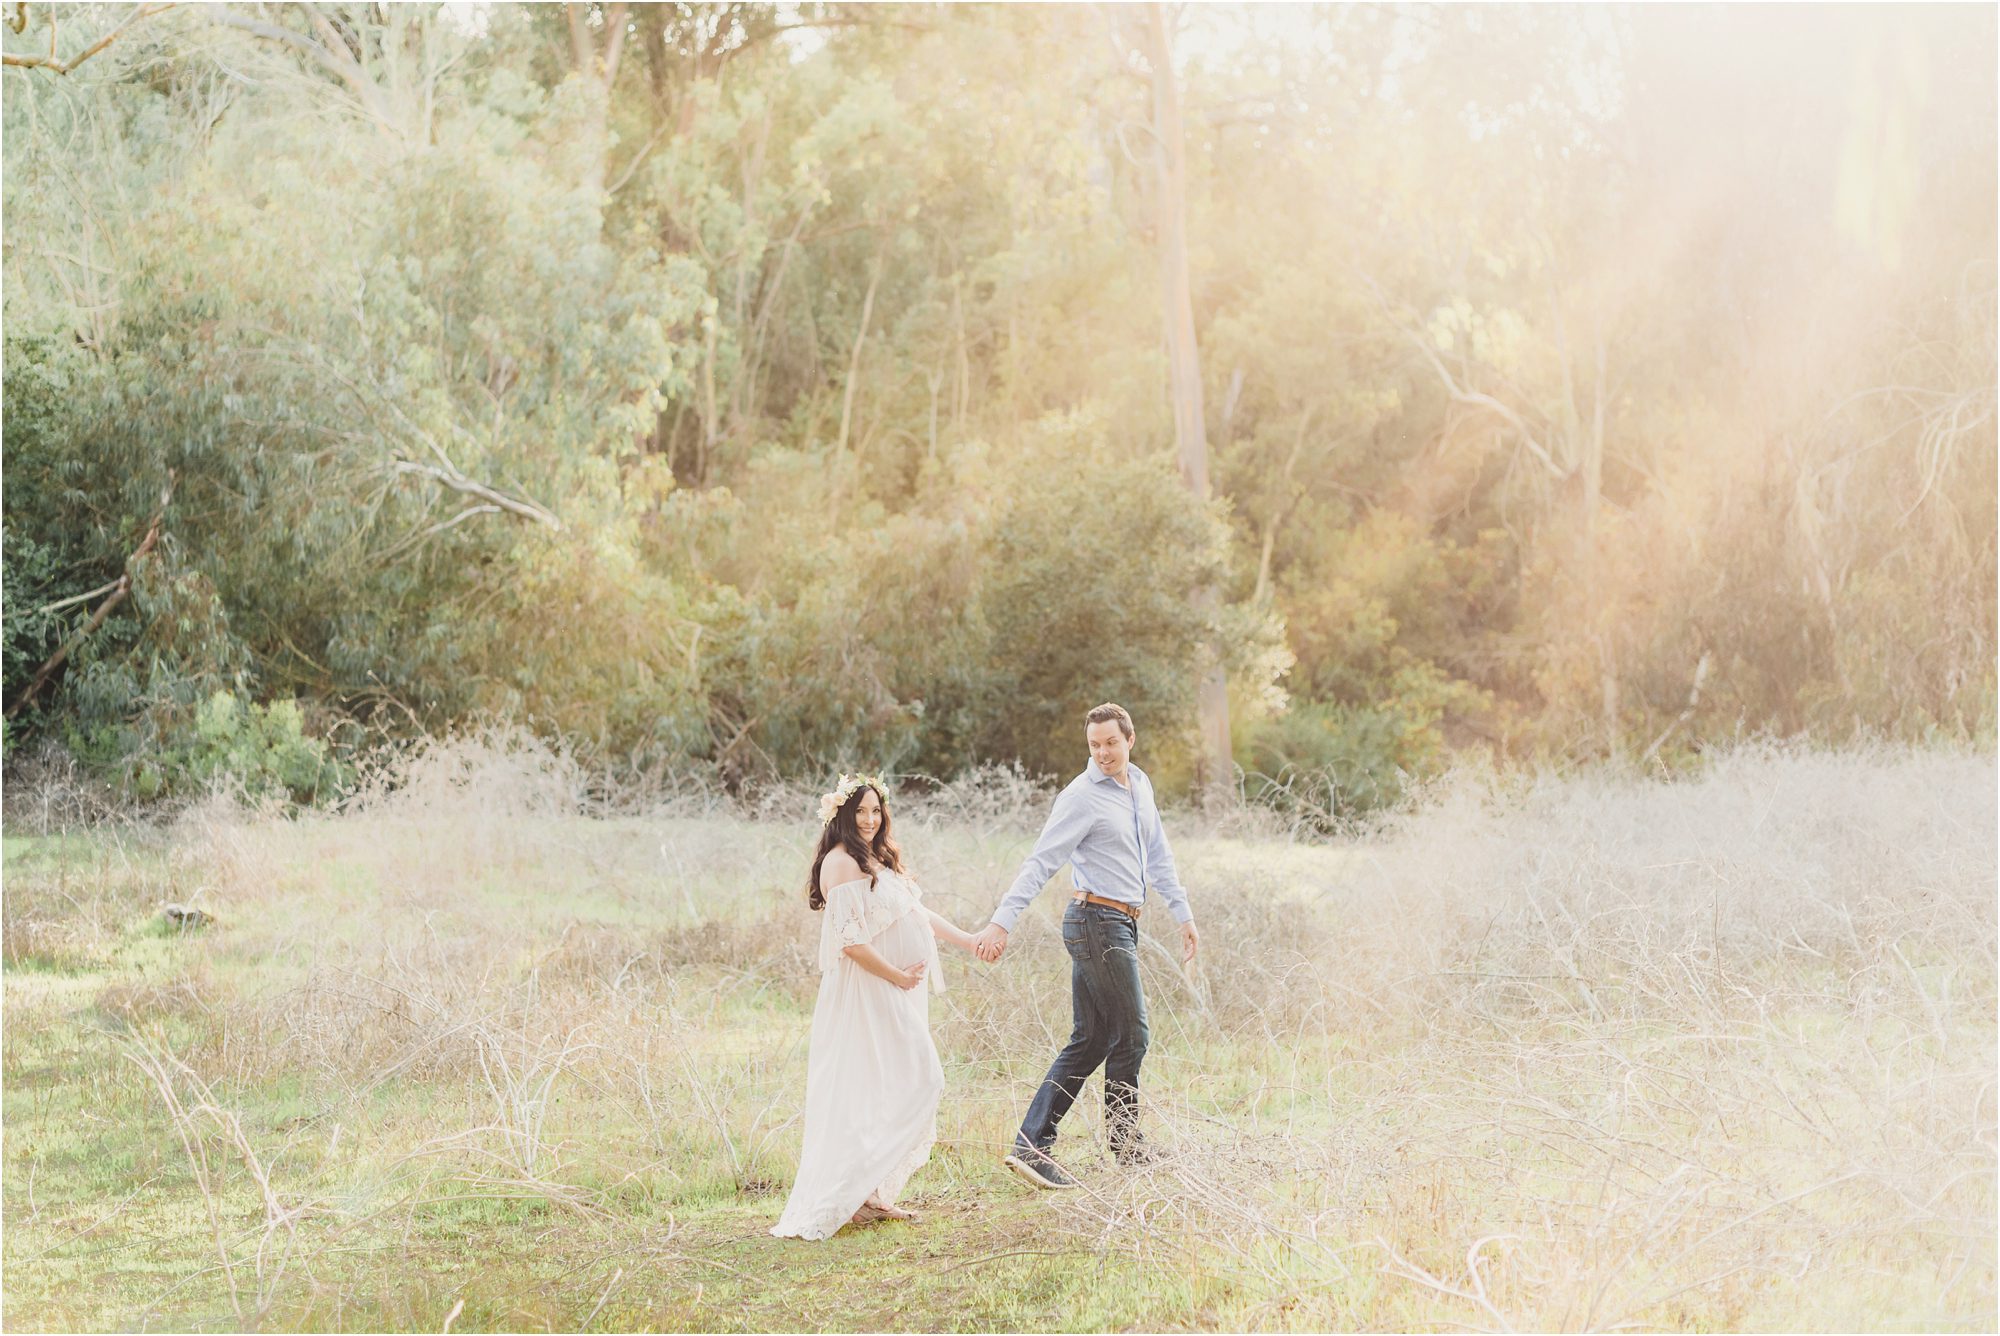 dreamy maternity photographer in so cal 0001